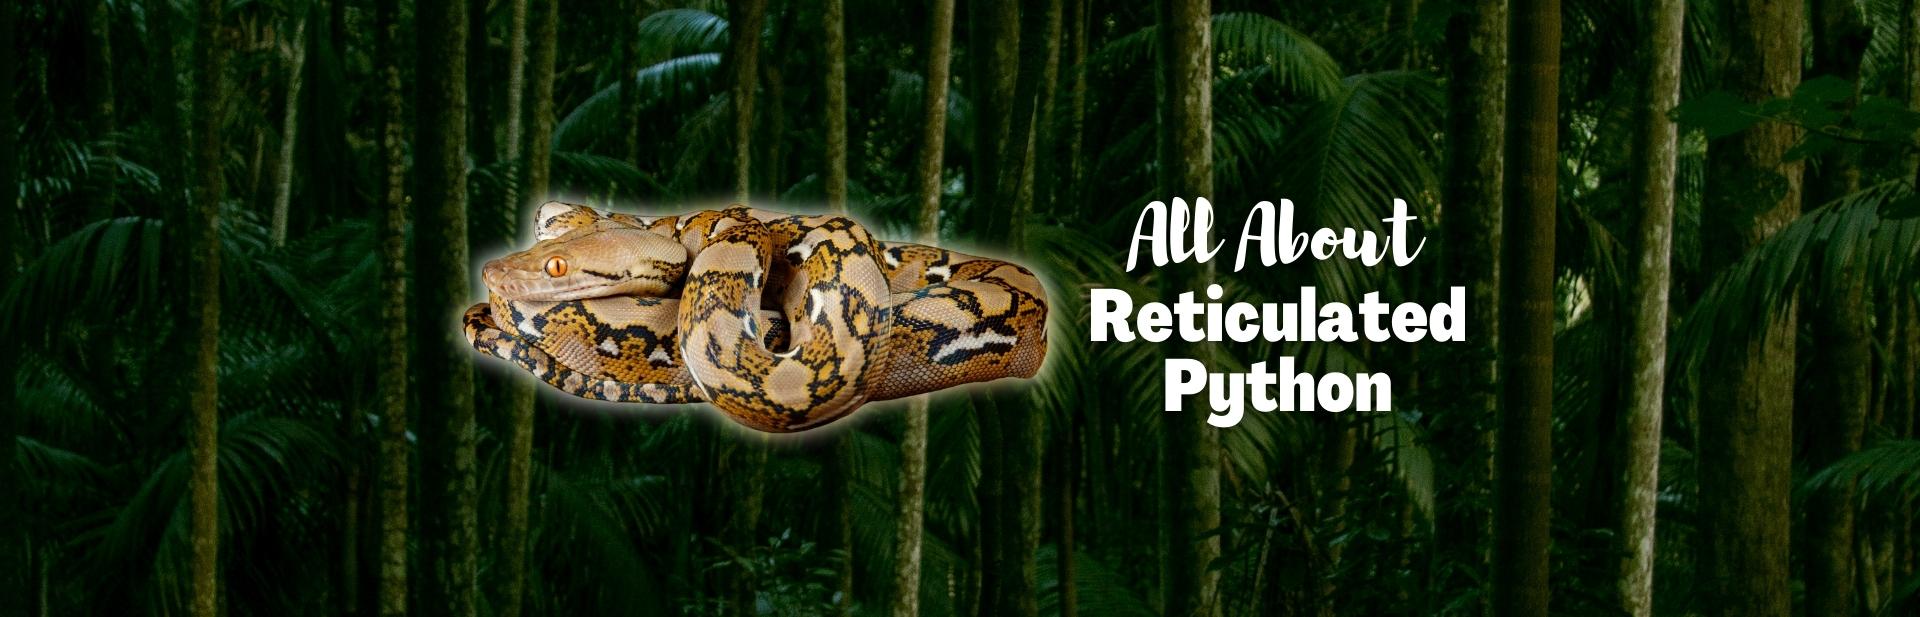 Reticulated Python: All About The Longest Snake in the World